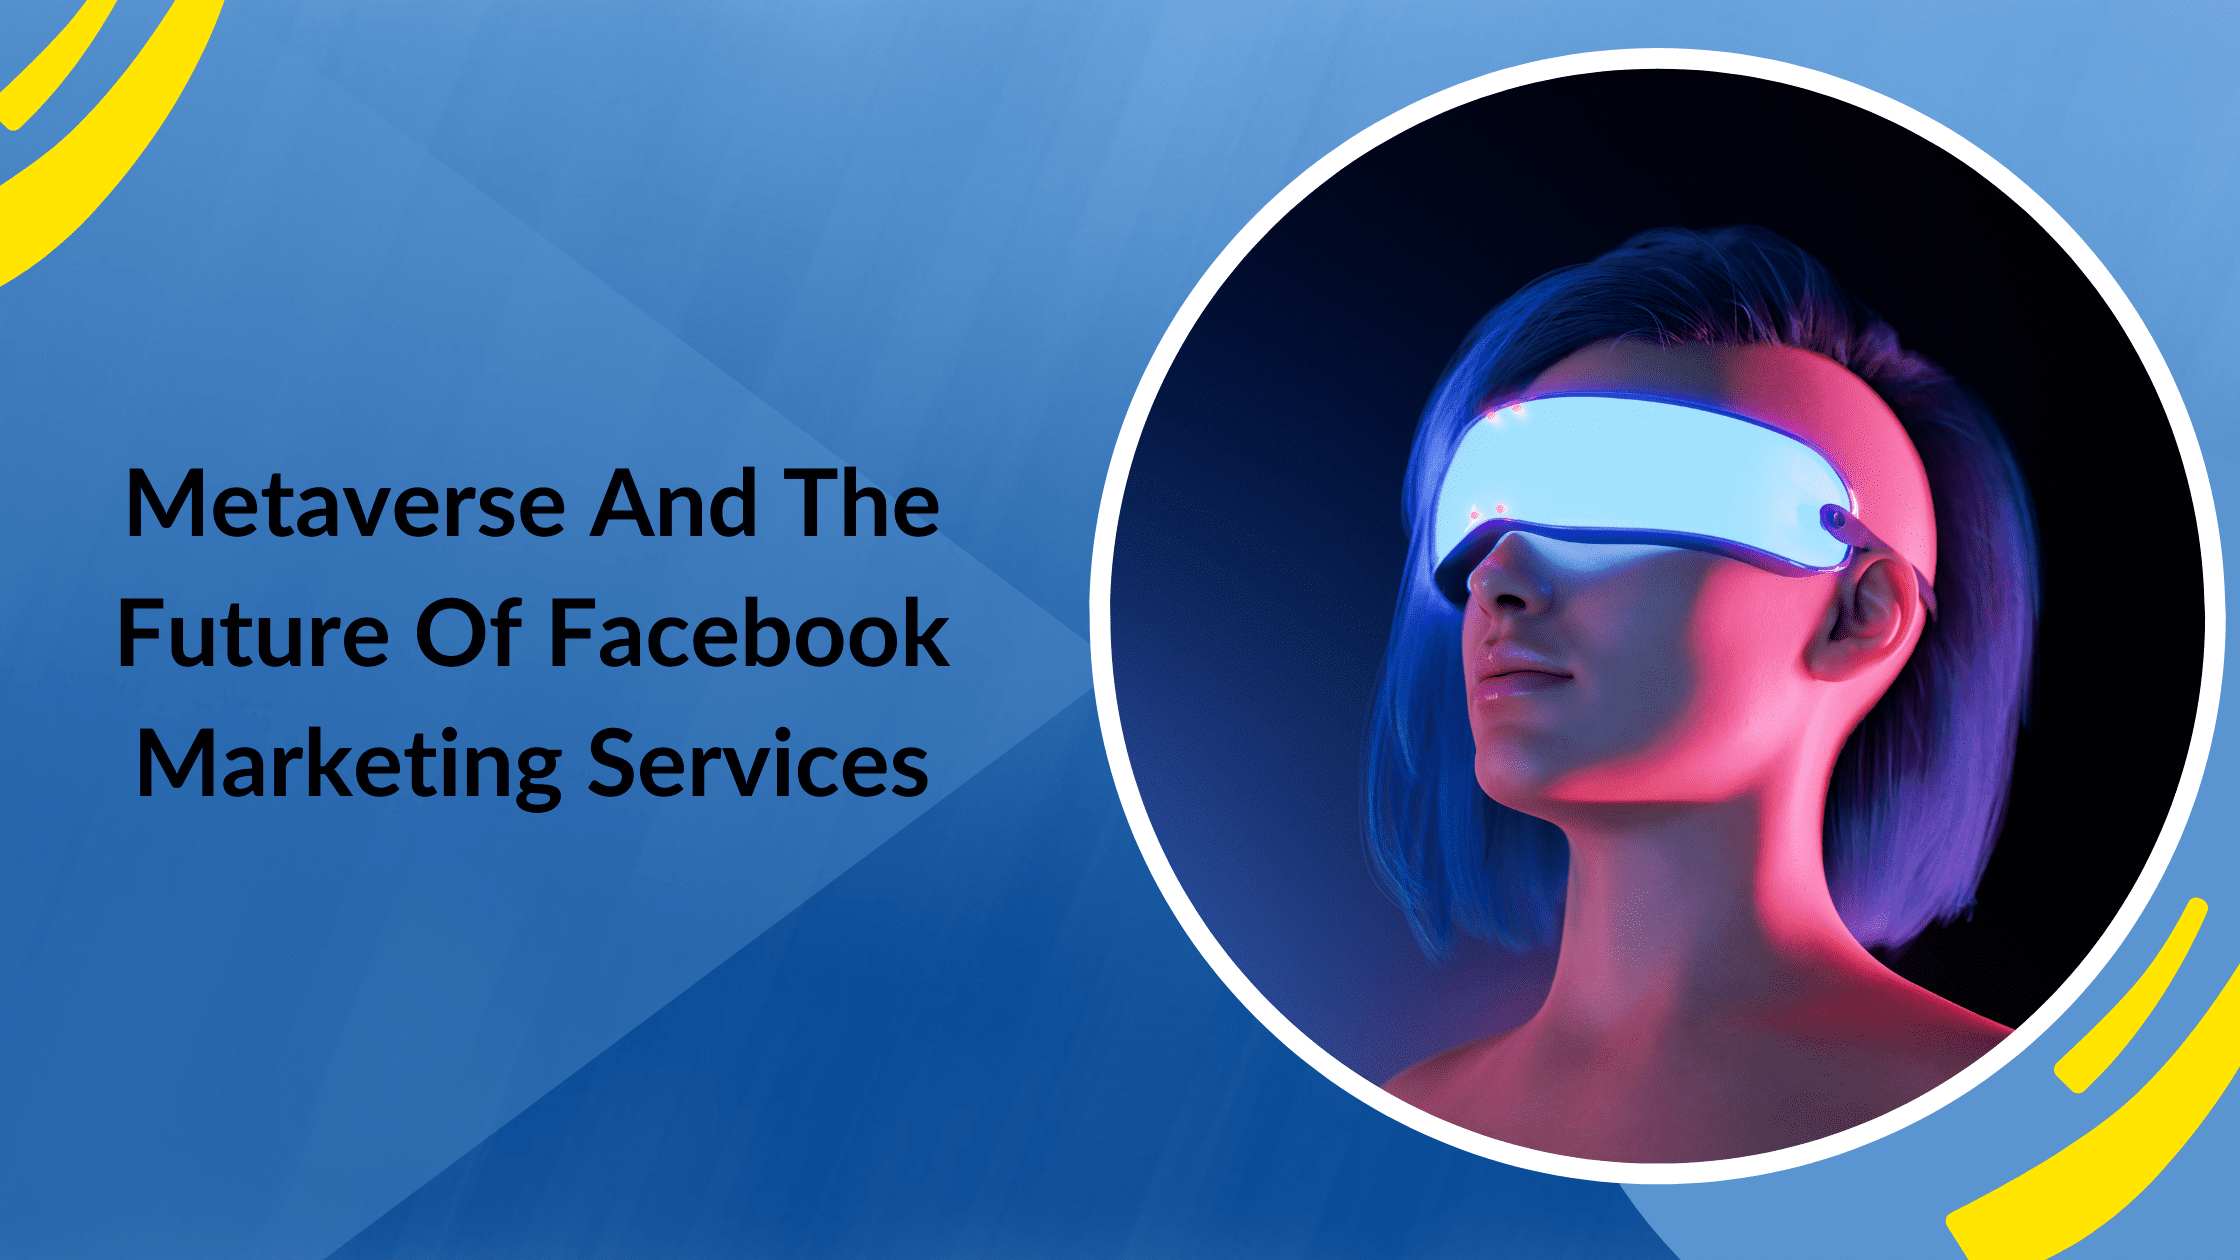 Metaverse And The Future Of Facebook Marketing Services